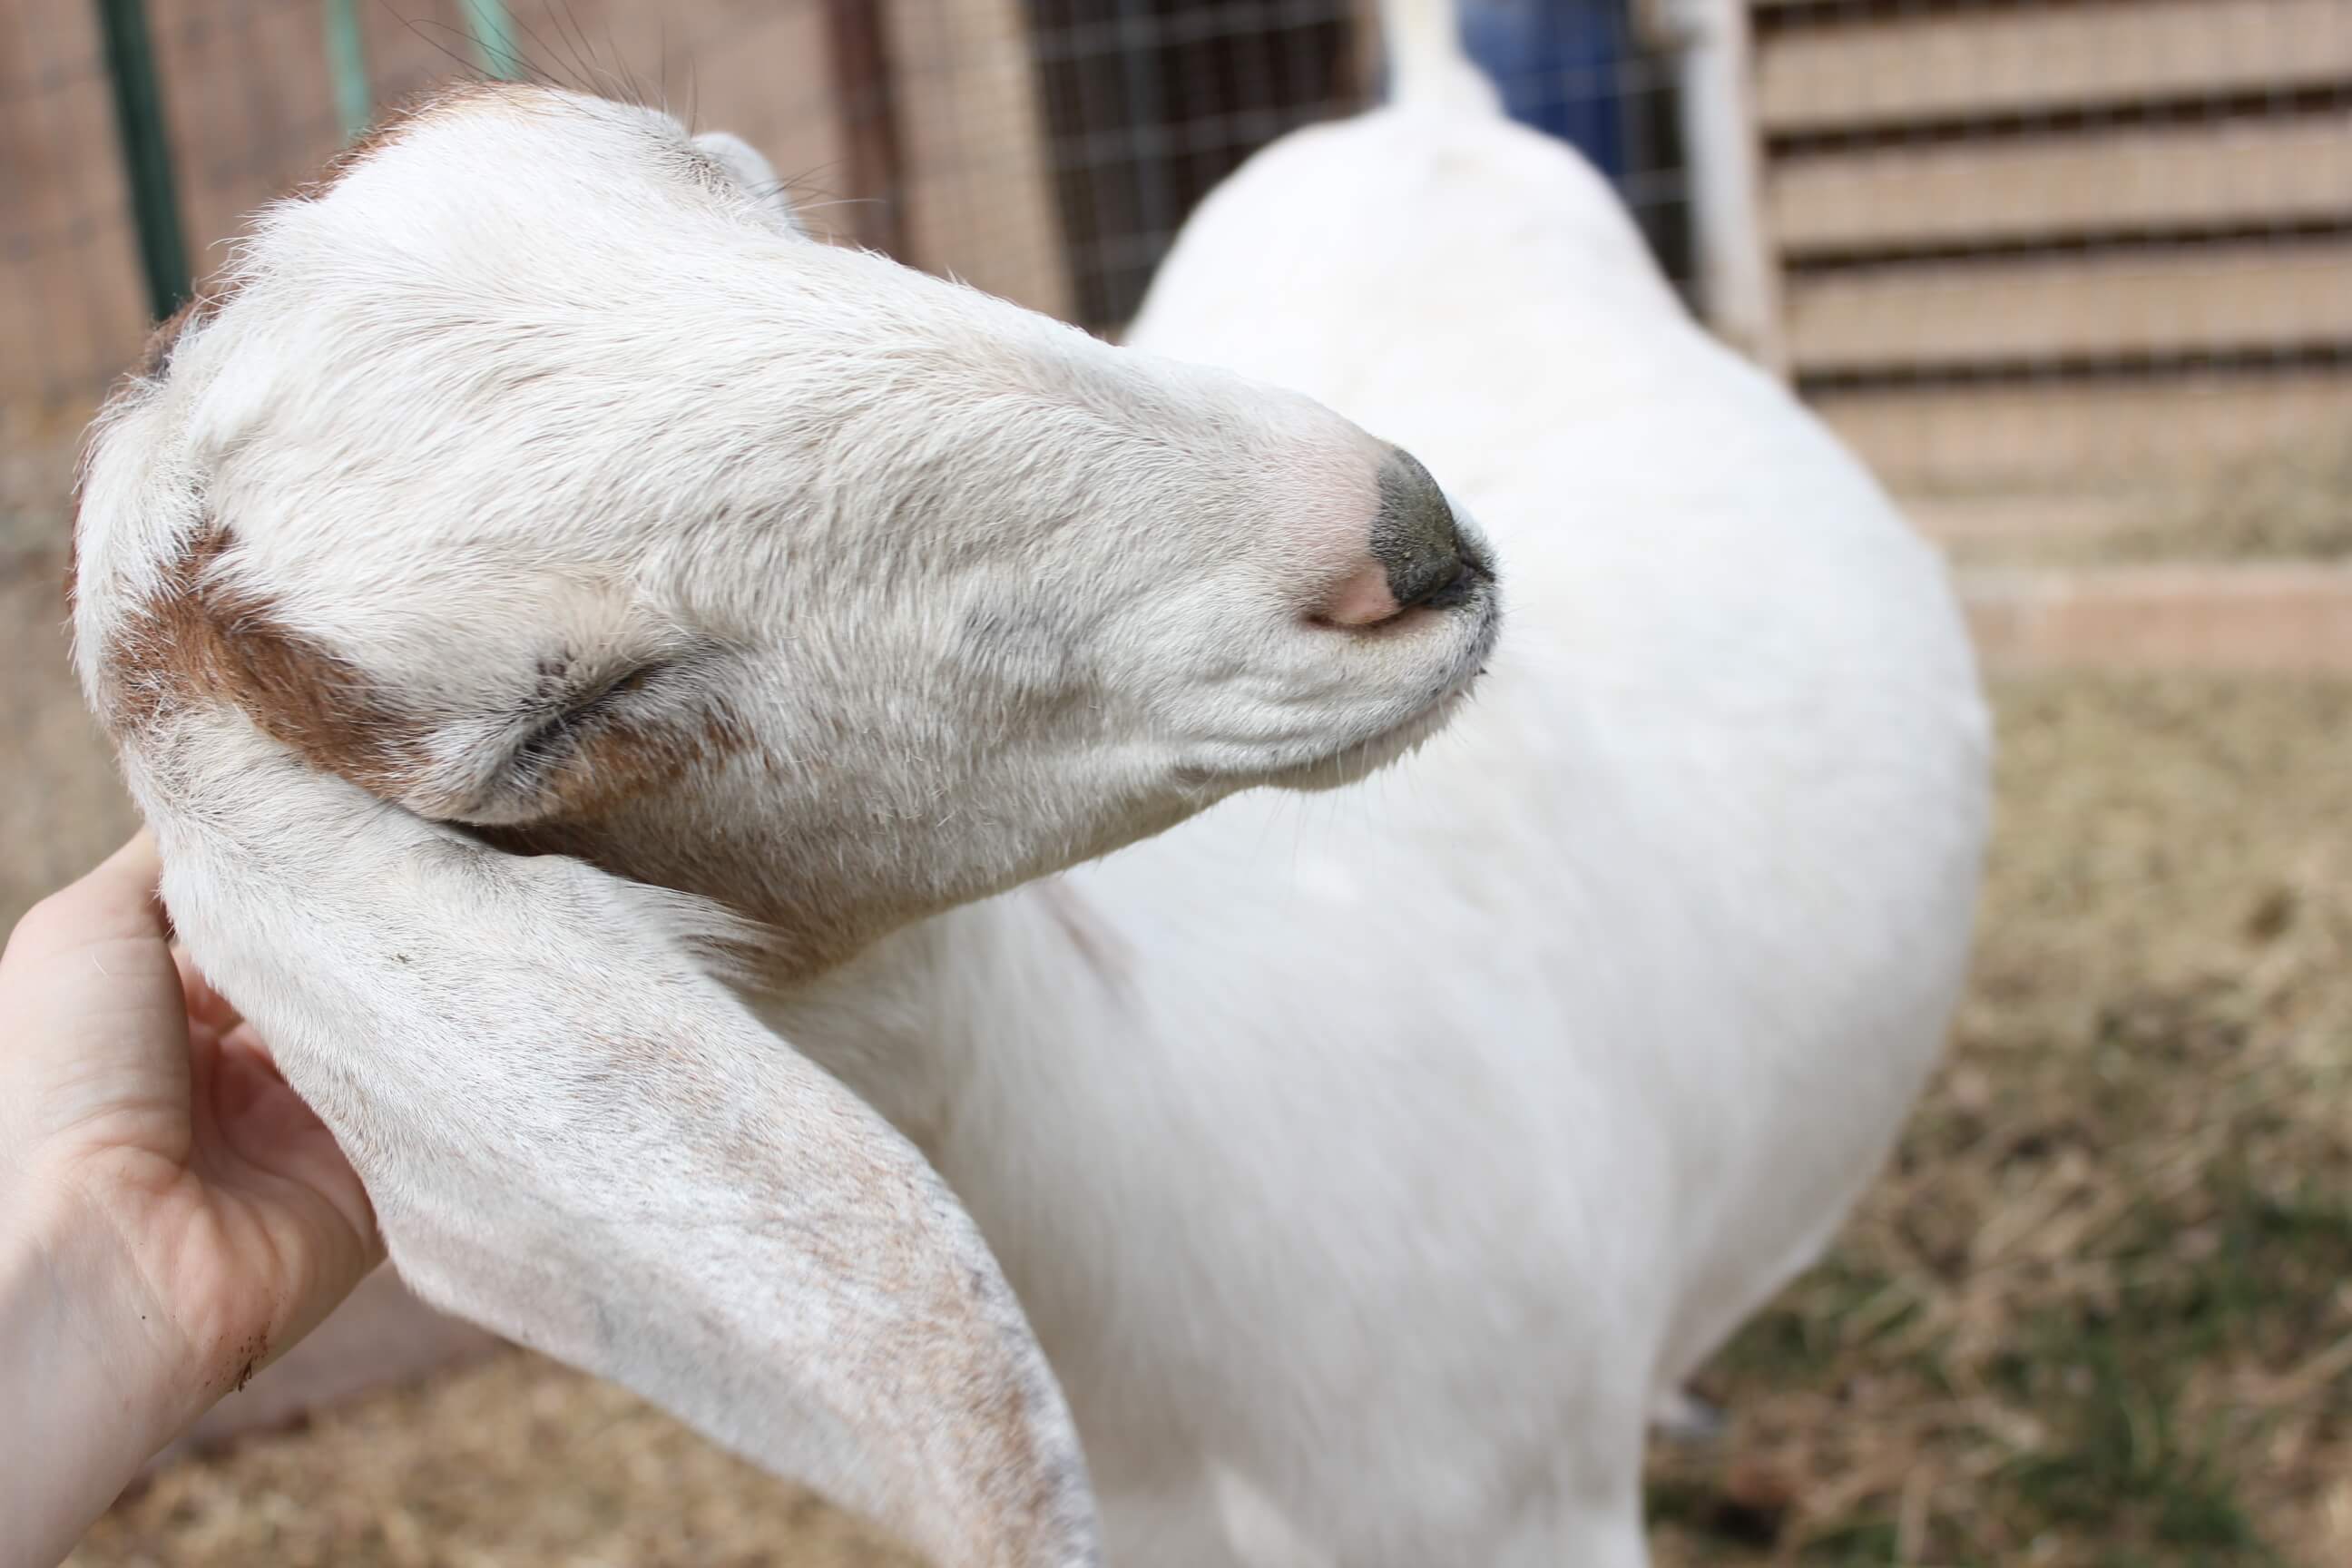 How to tell if your goat is pregnant